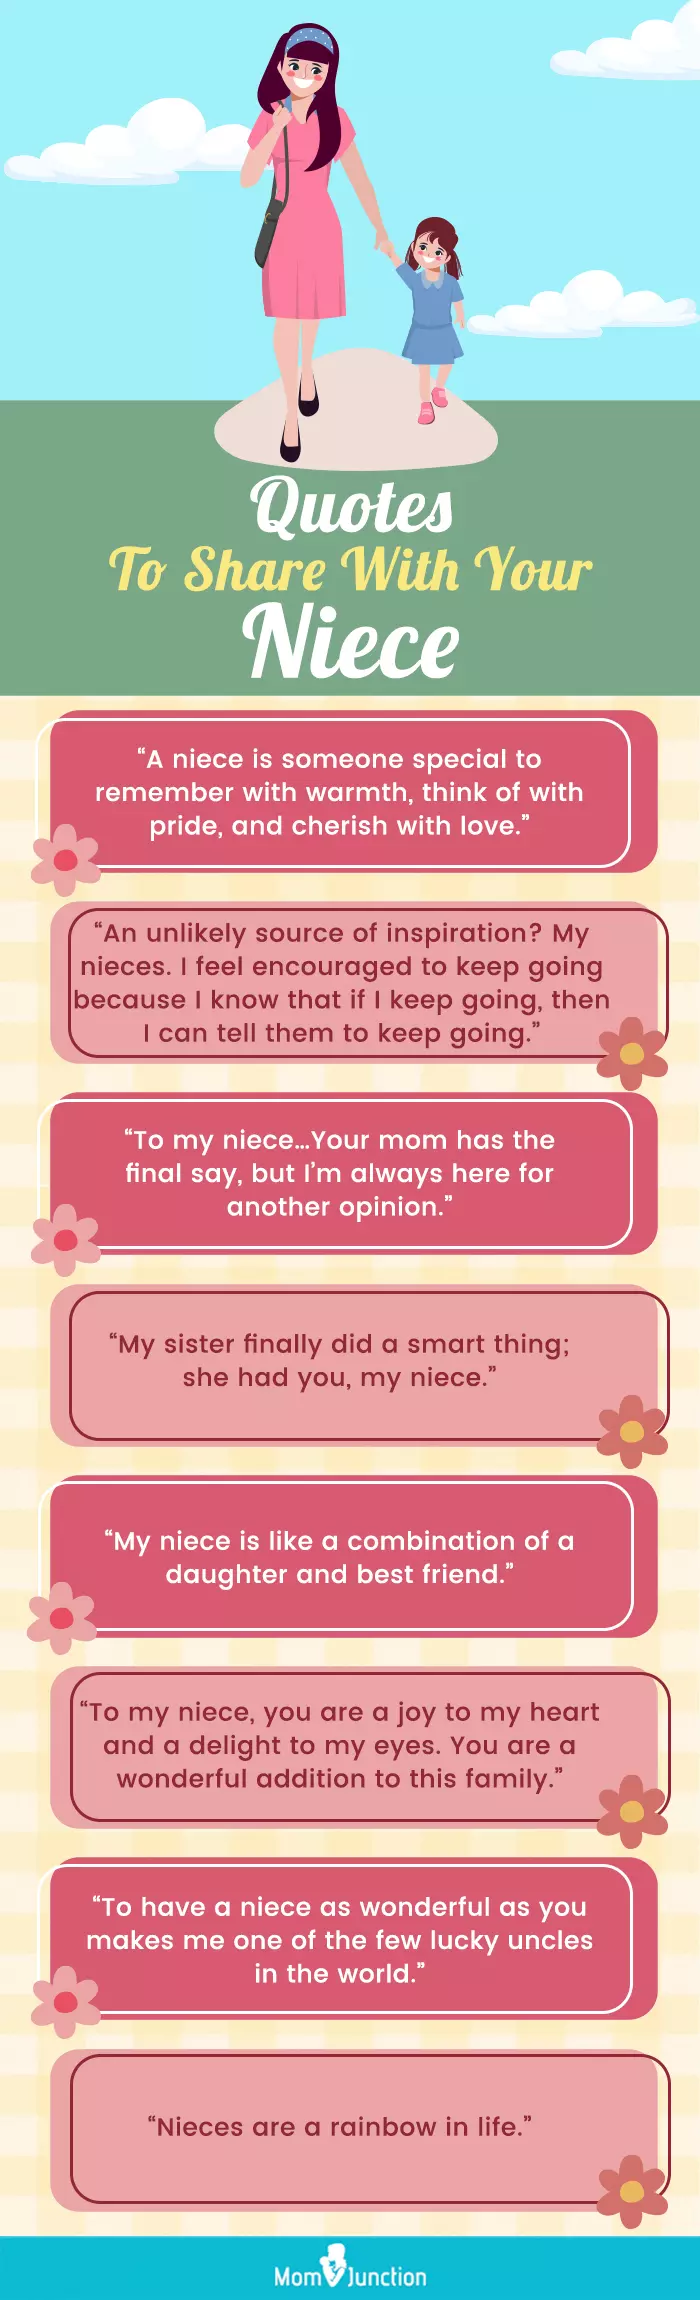 quotes to share with your niece (infographic)